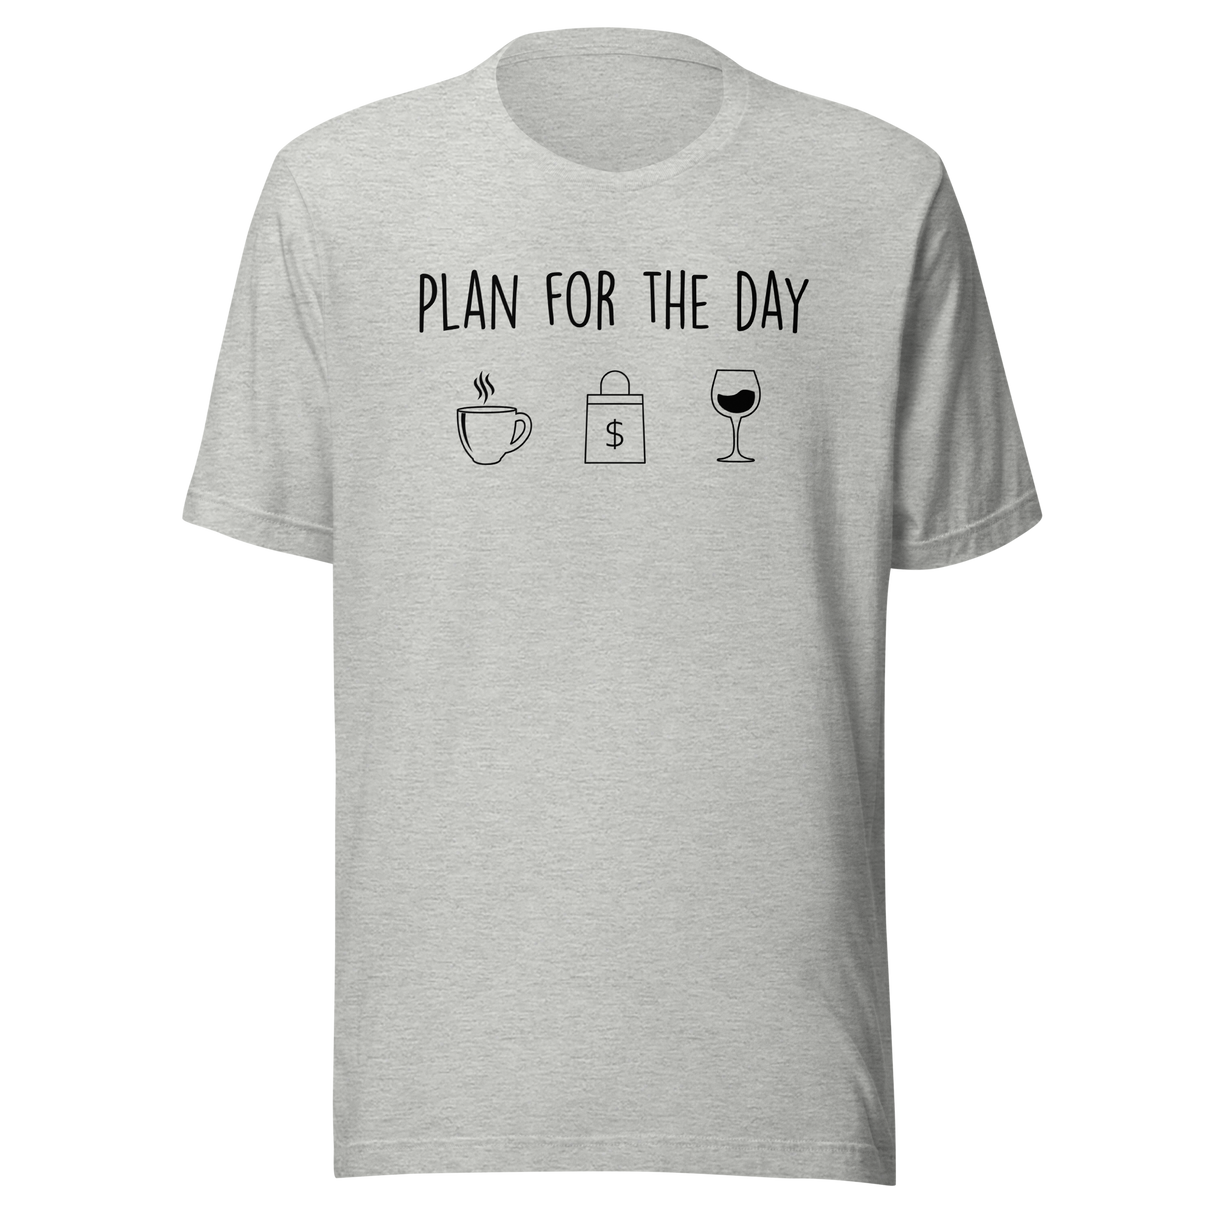 plan-for-the-day-shopping-tee-fashion-t-shirt-wine-tee-life-t-shirt-truth-tee#color_athletic-heather